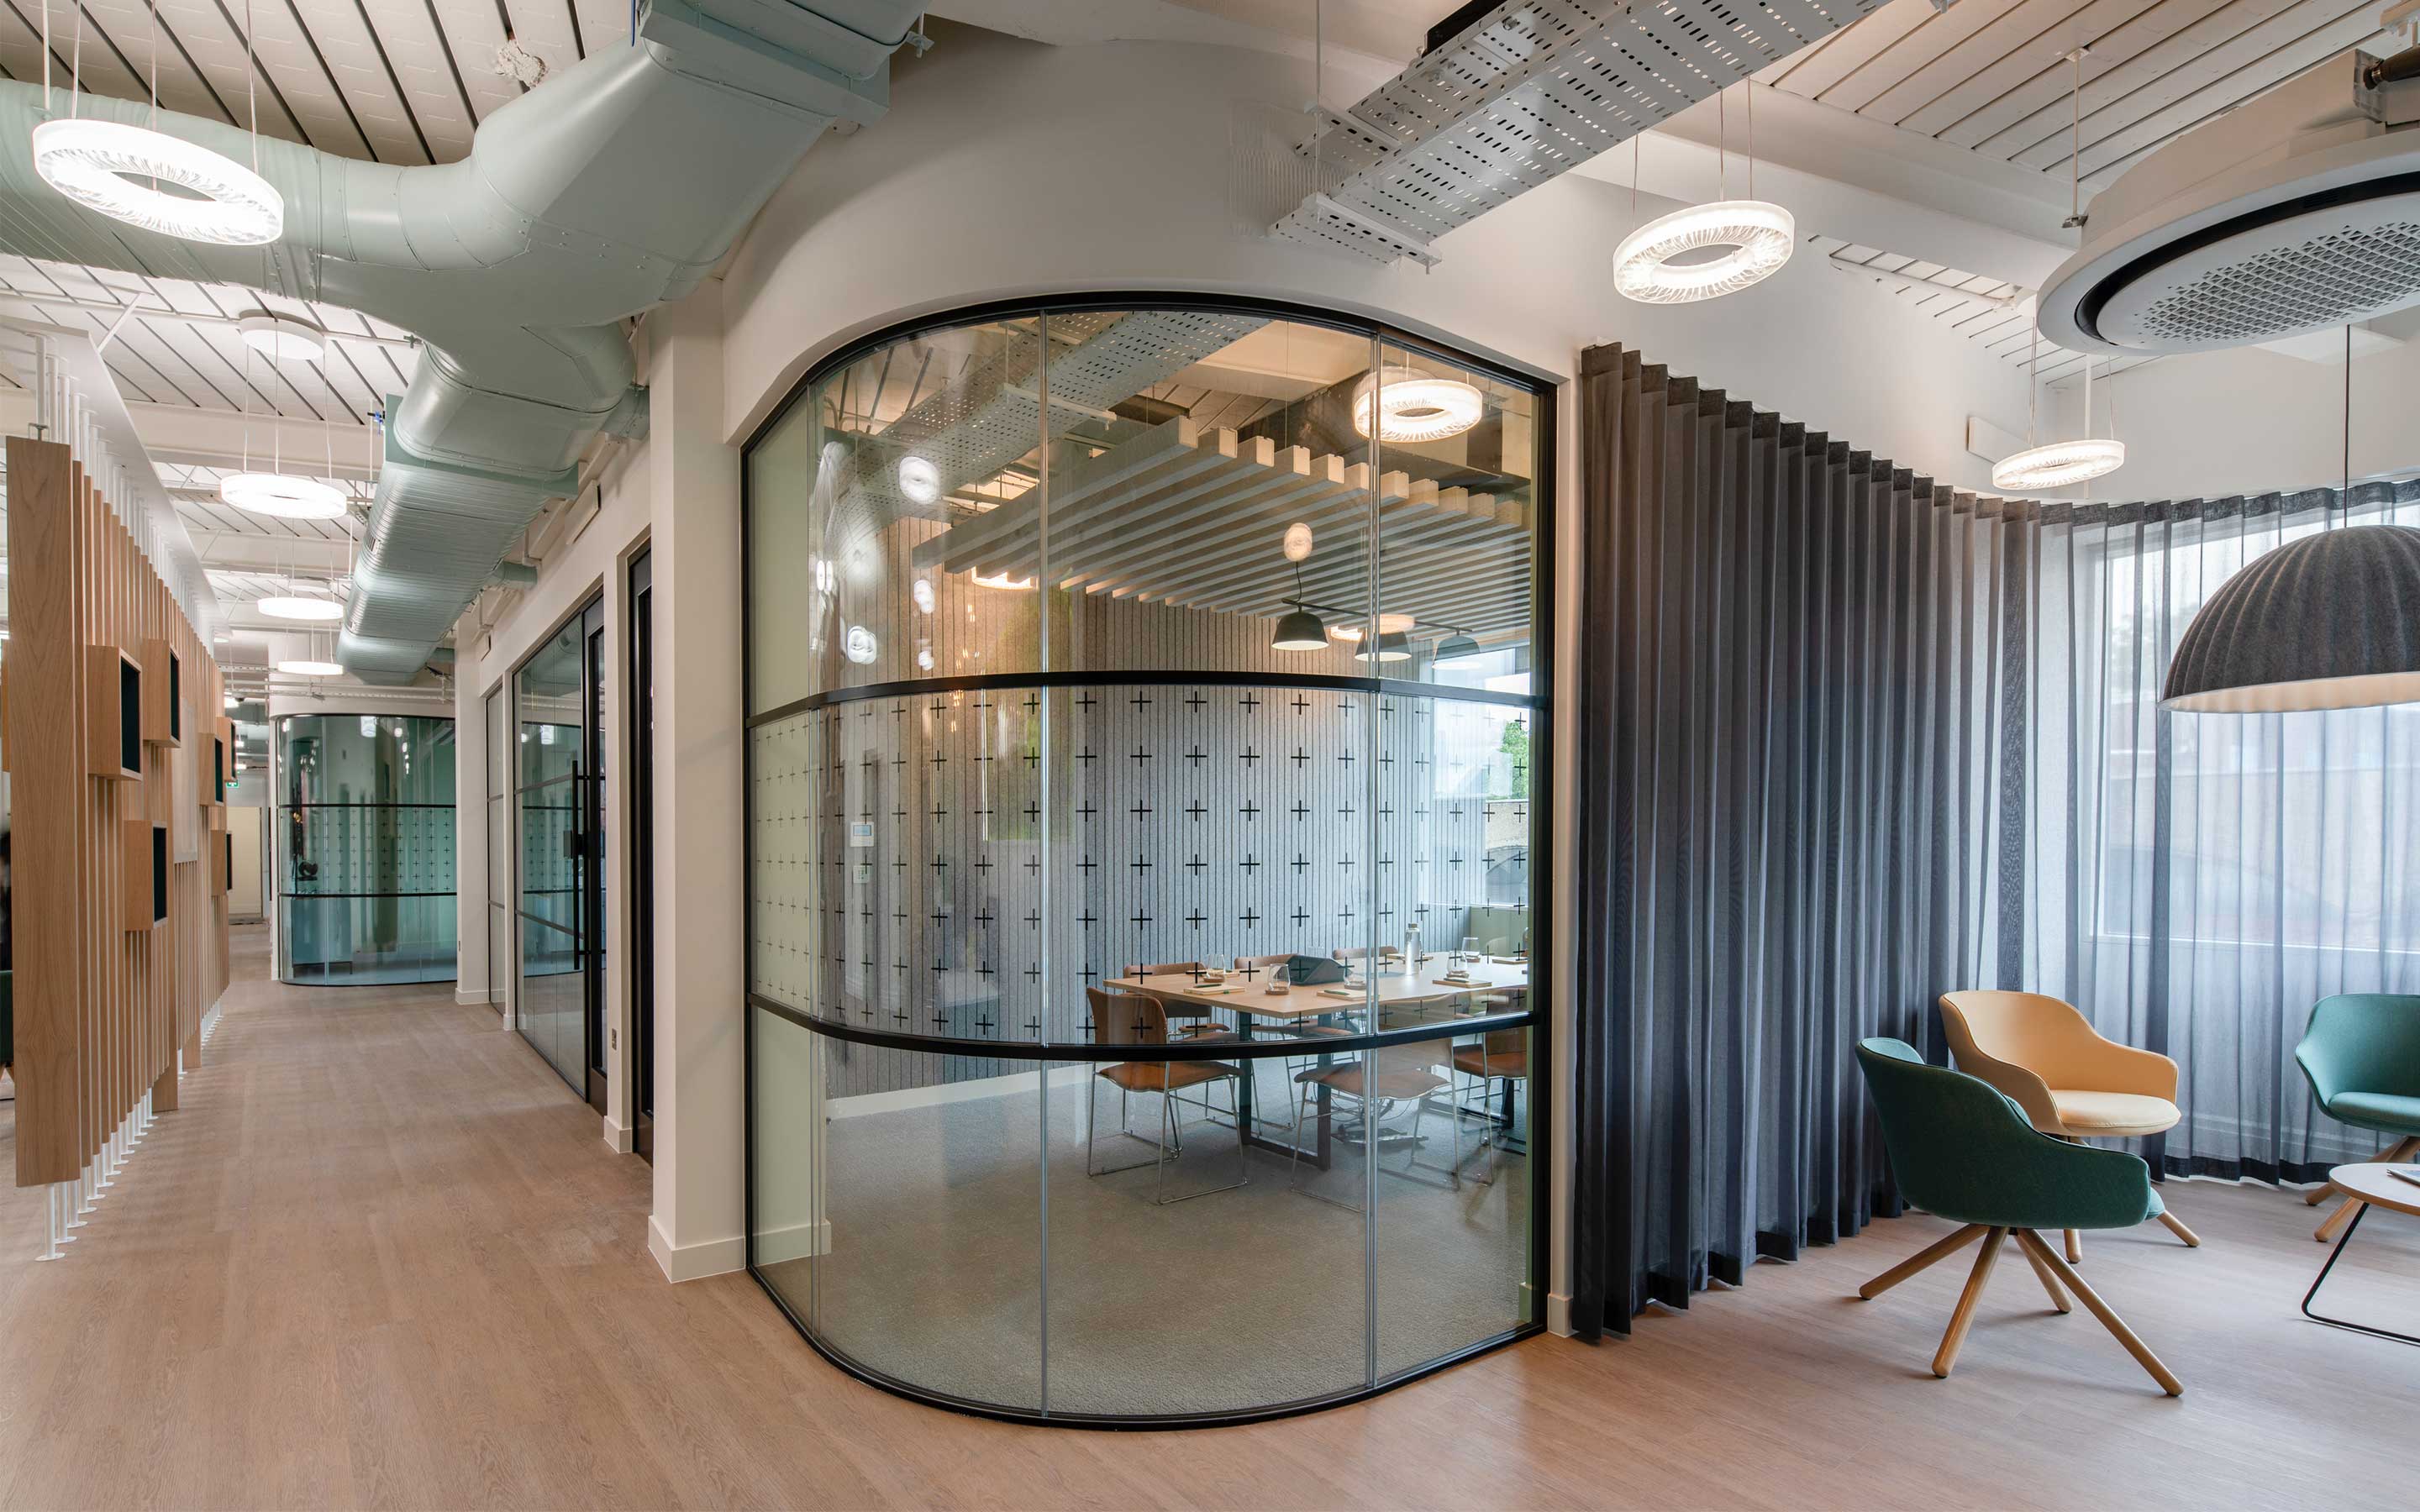 A glass walled meeting room in the middle of a modern office interior design. A soft seating area with a semi-transparent privacy curtain abuts the meeting room, creating multifunctional spaces